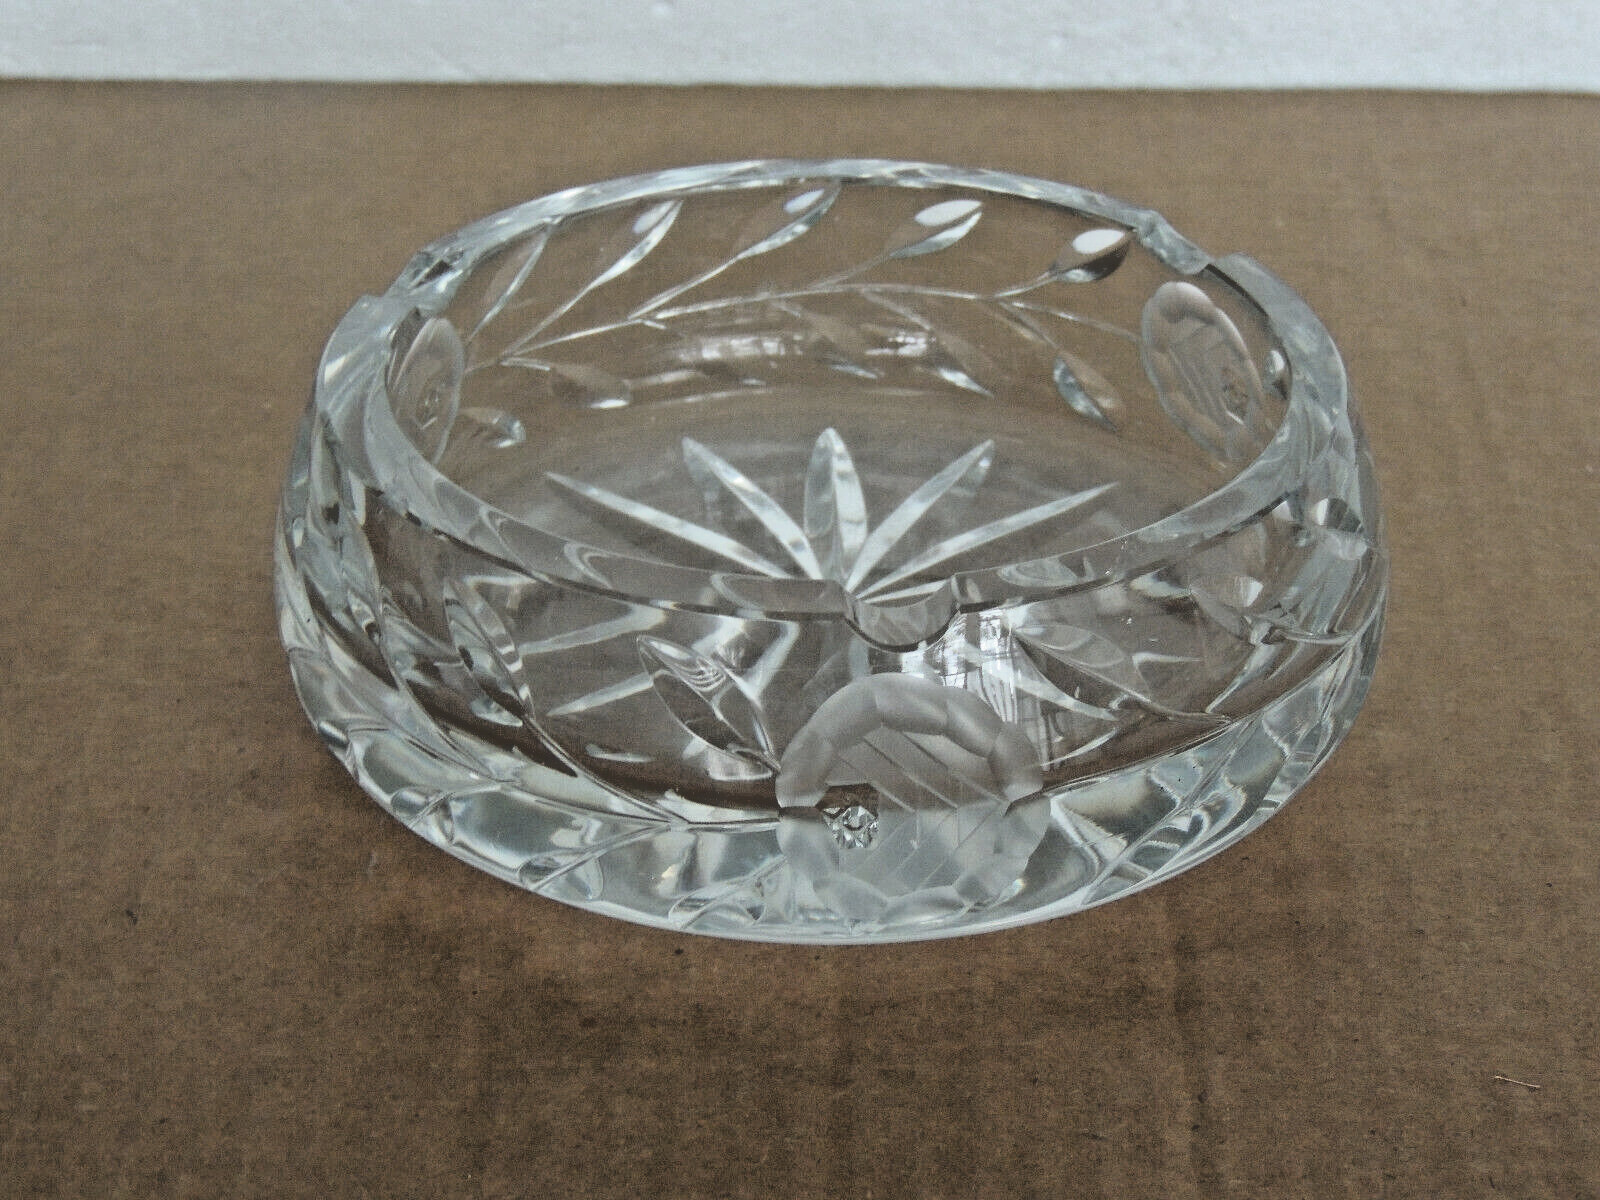 VTG Cut Crystal Large Ashtray  FROM HUNGARY 6.5 DIAMETER 2 1/4 HEIGHT HEAVY 4LB